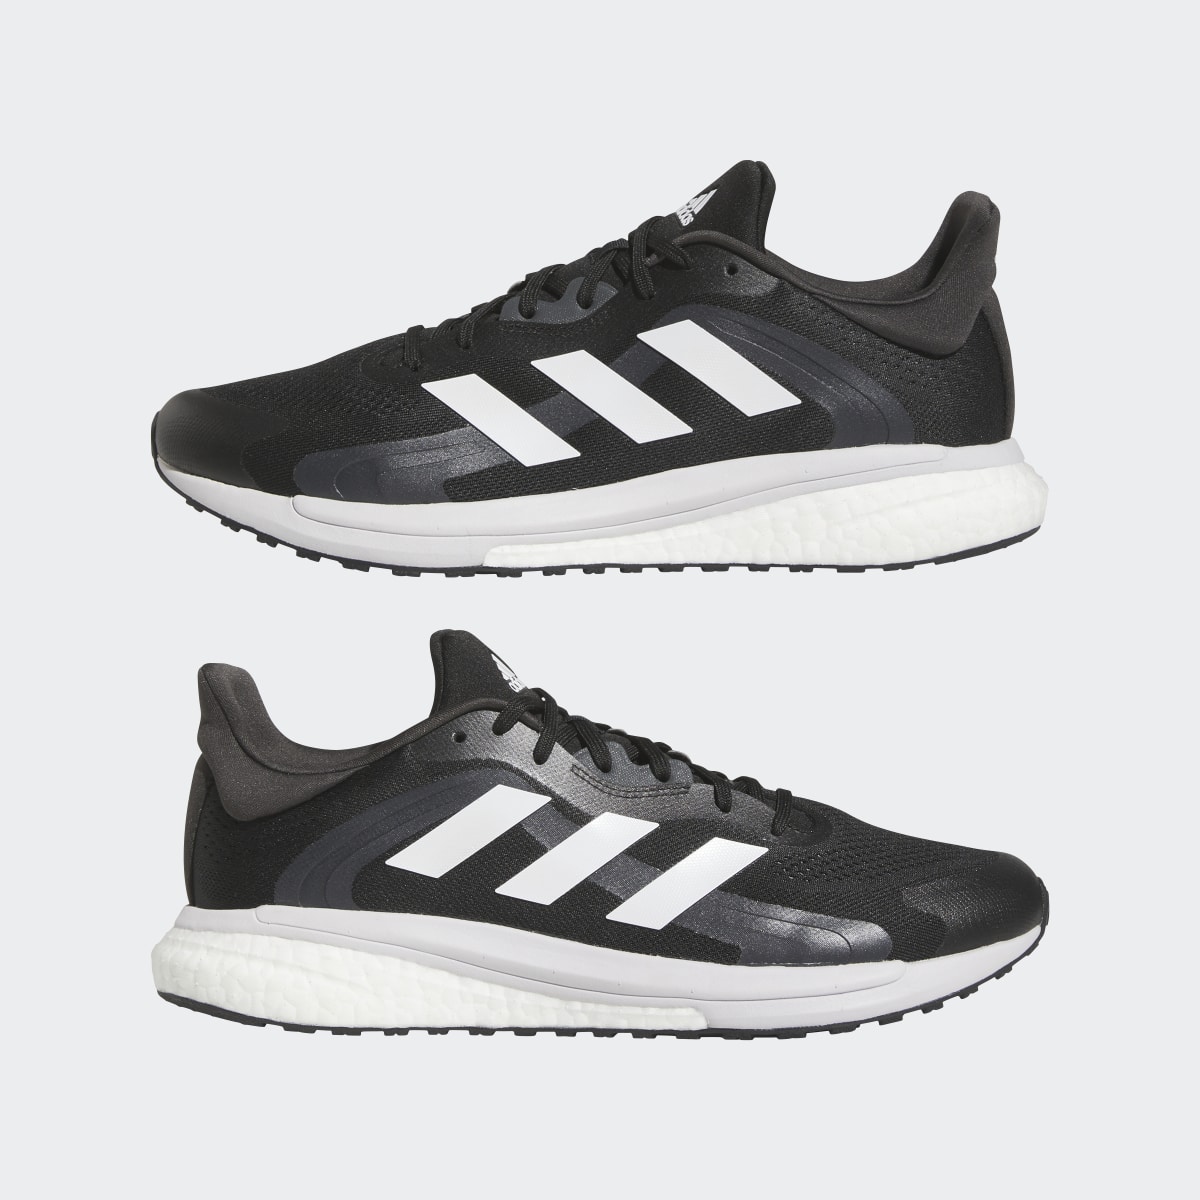 Adidas SolarGlide 4 ST Shoes. 12